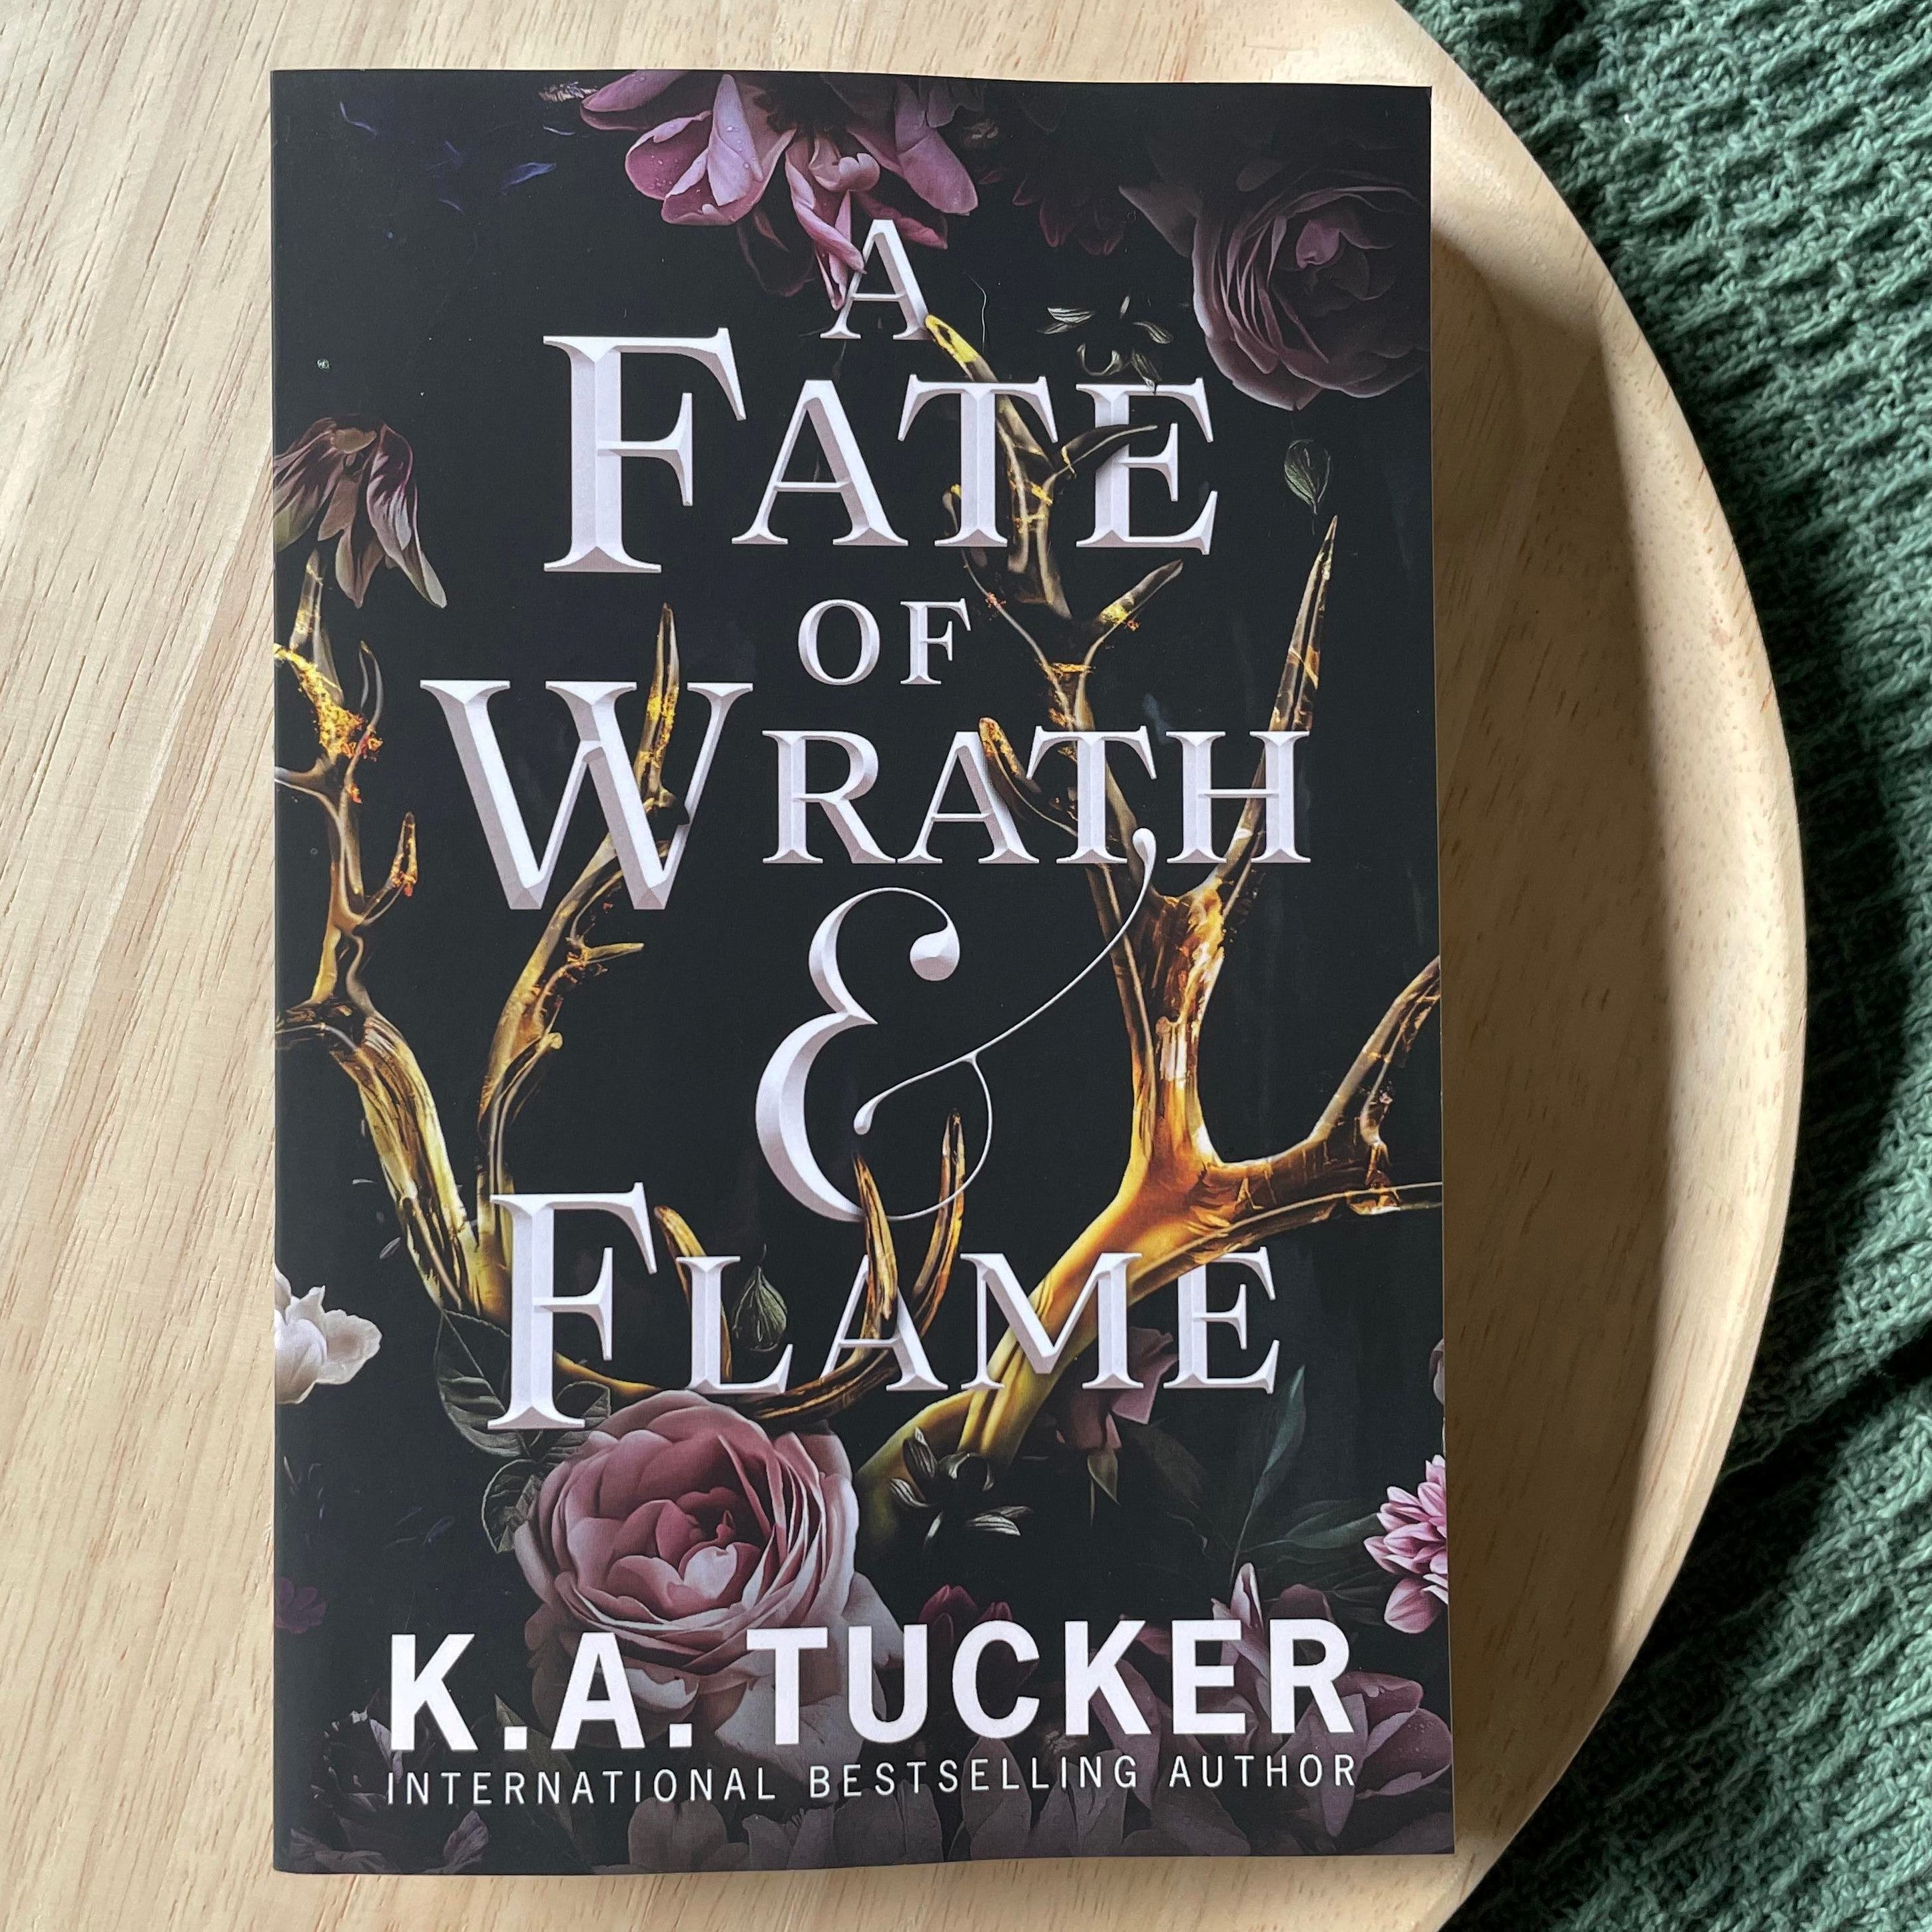 Fate and Flame by K.A. Tucker